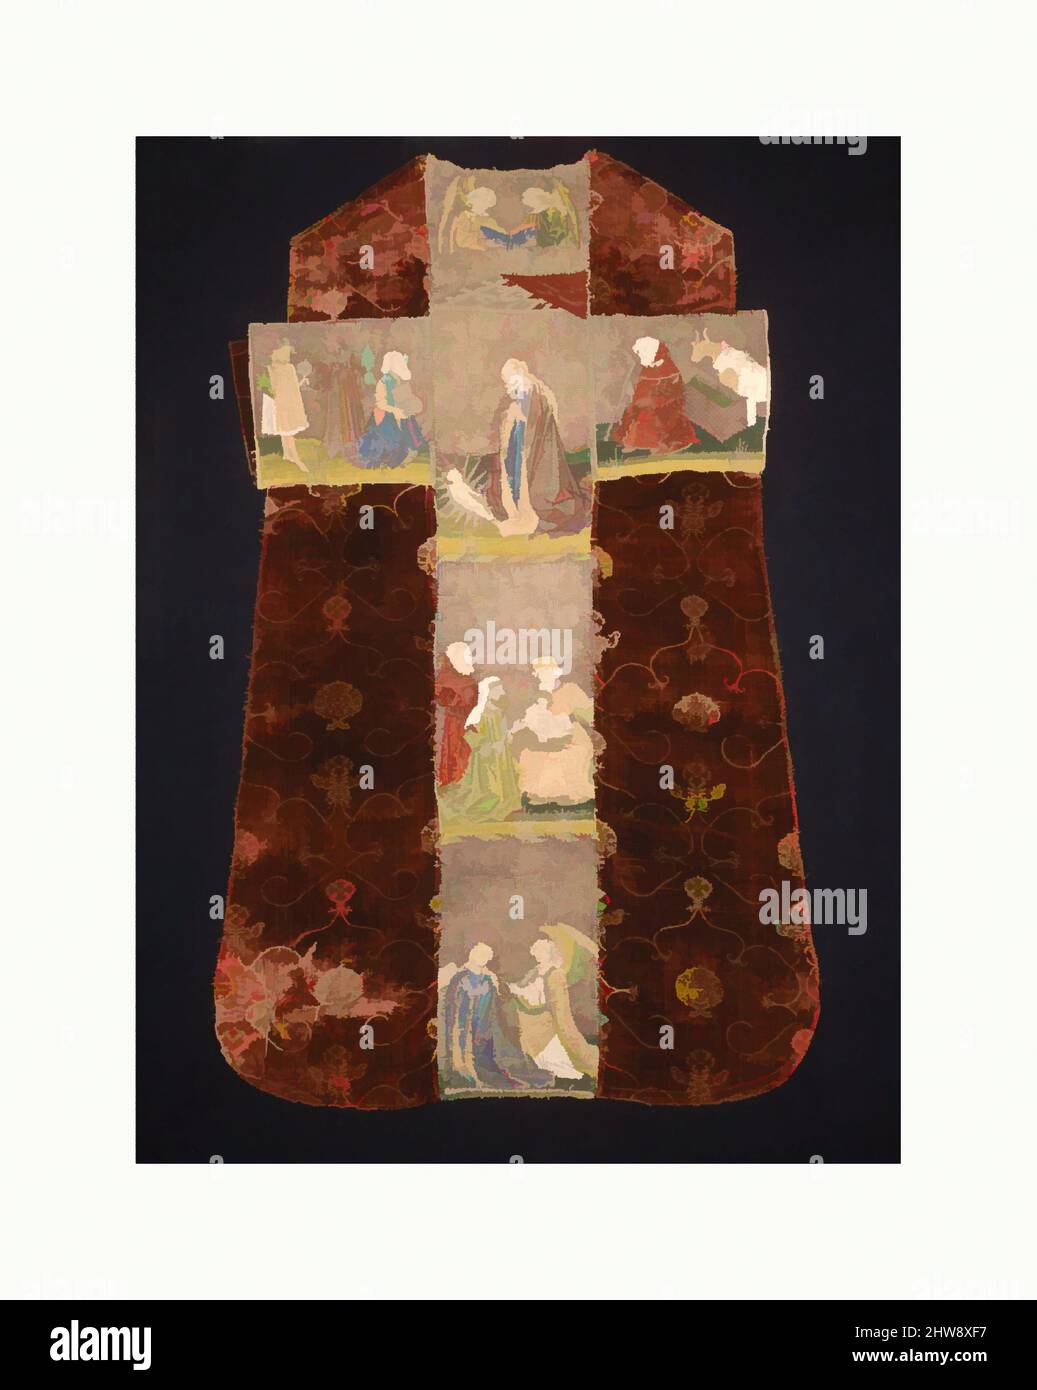 Art inspired by Chasuble Back with an Orphrey Cross, second half 15th century, Italian or Spanish; German, Chasuble Back: silk, 46 3/4 x 30 3/4 in. (118.7 x 78 cm), Textiles-Ecclesiastical, Classic works modernized by Artotop with a splash of modernity. Shapes, color and value, eye-catching visual impact on art. Emotions through freedom of artworks in a contemporary way. A timeless message pursuing a wildly creative new direction. Artists turning to the digital medium and creating the Artotop NFT Stock Photo